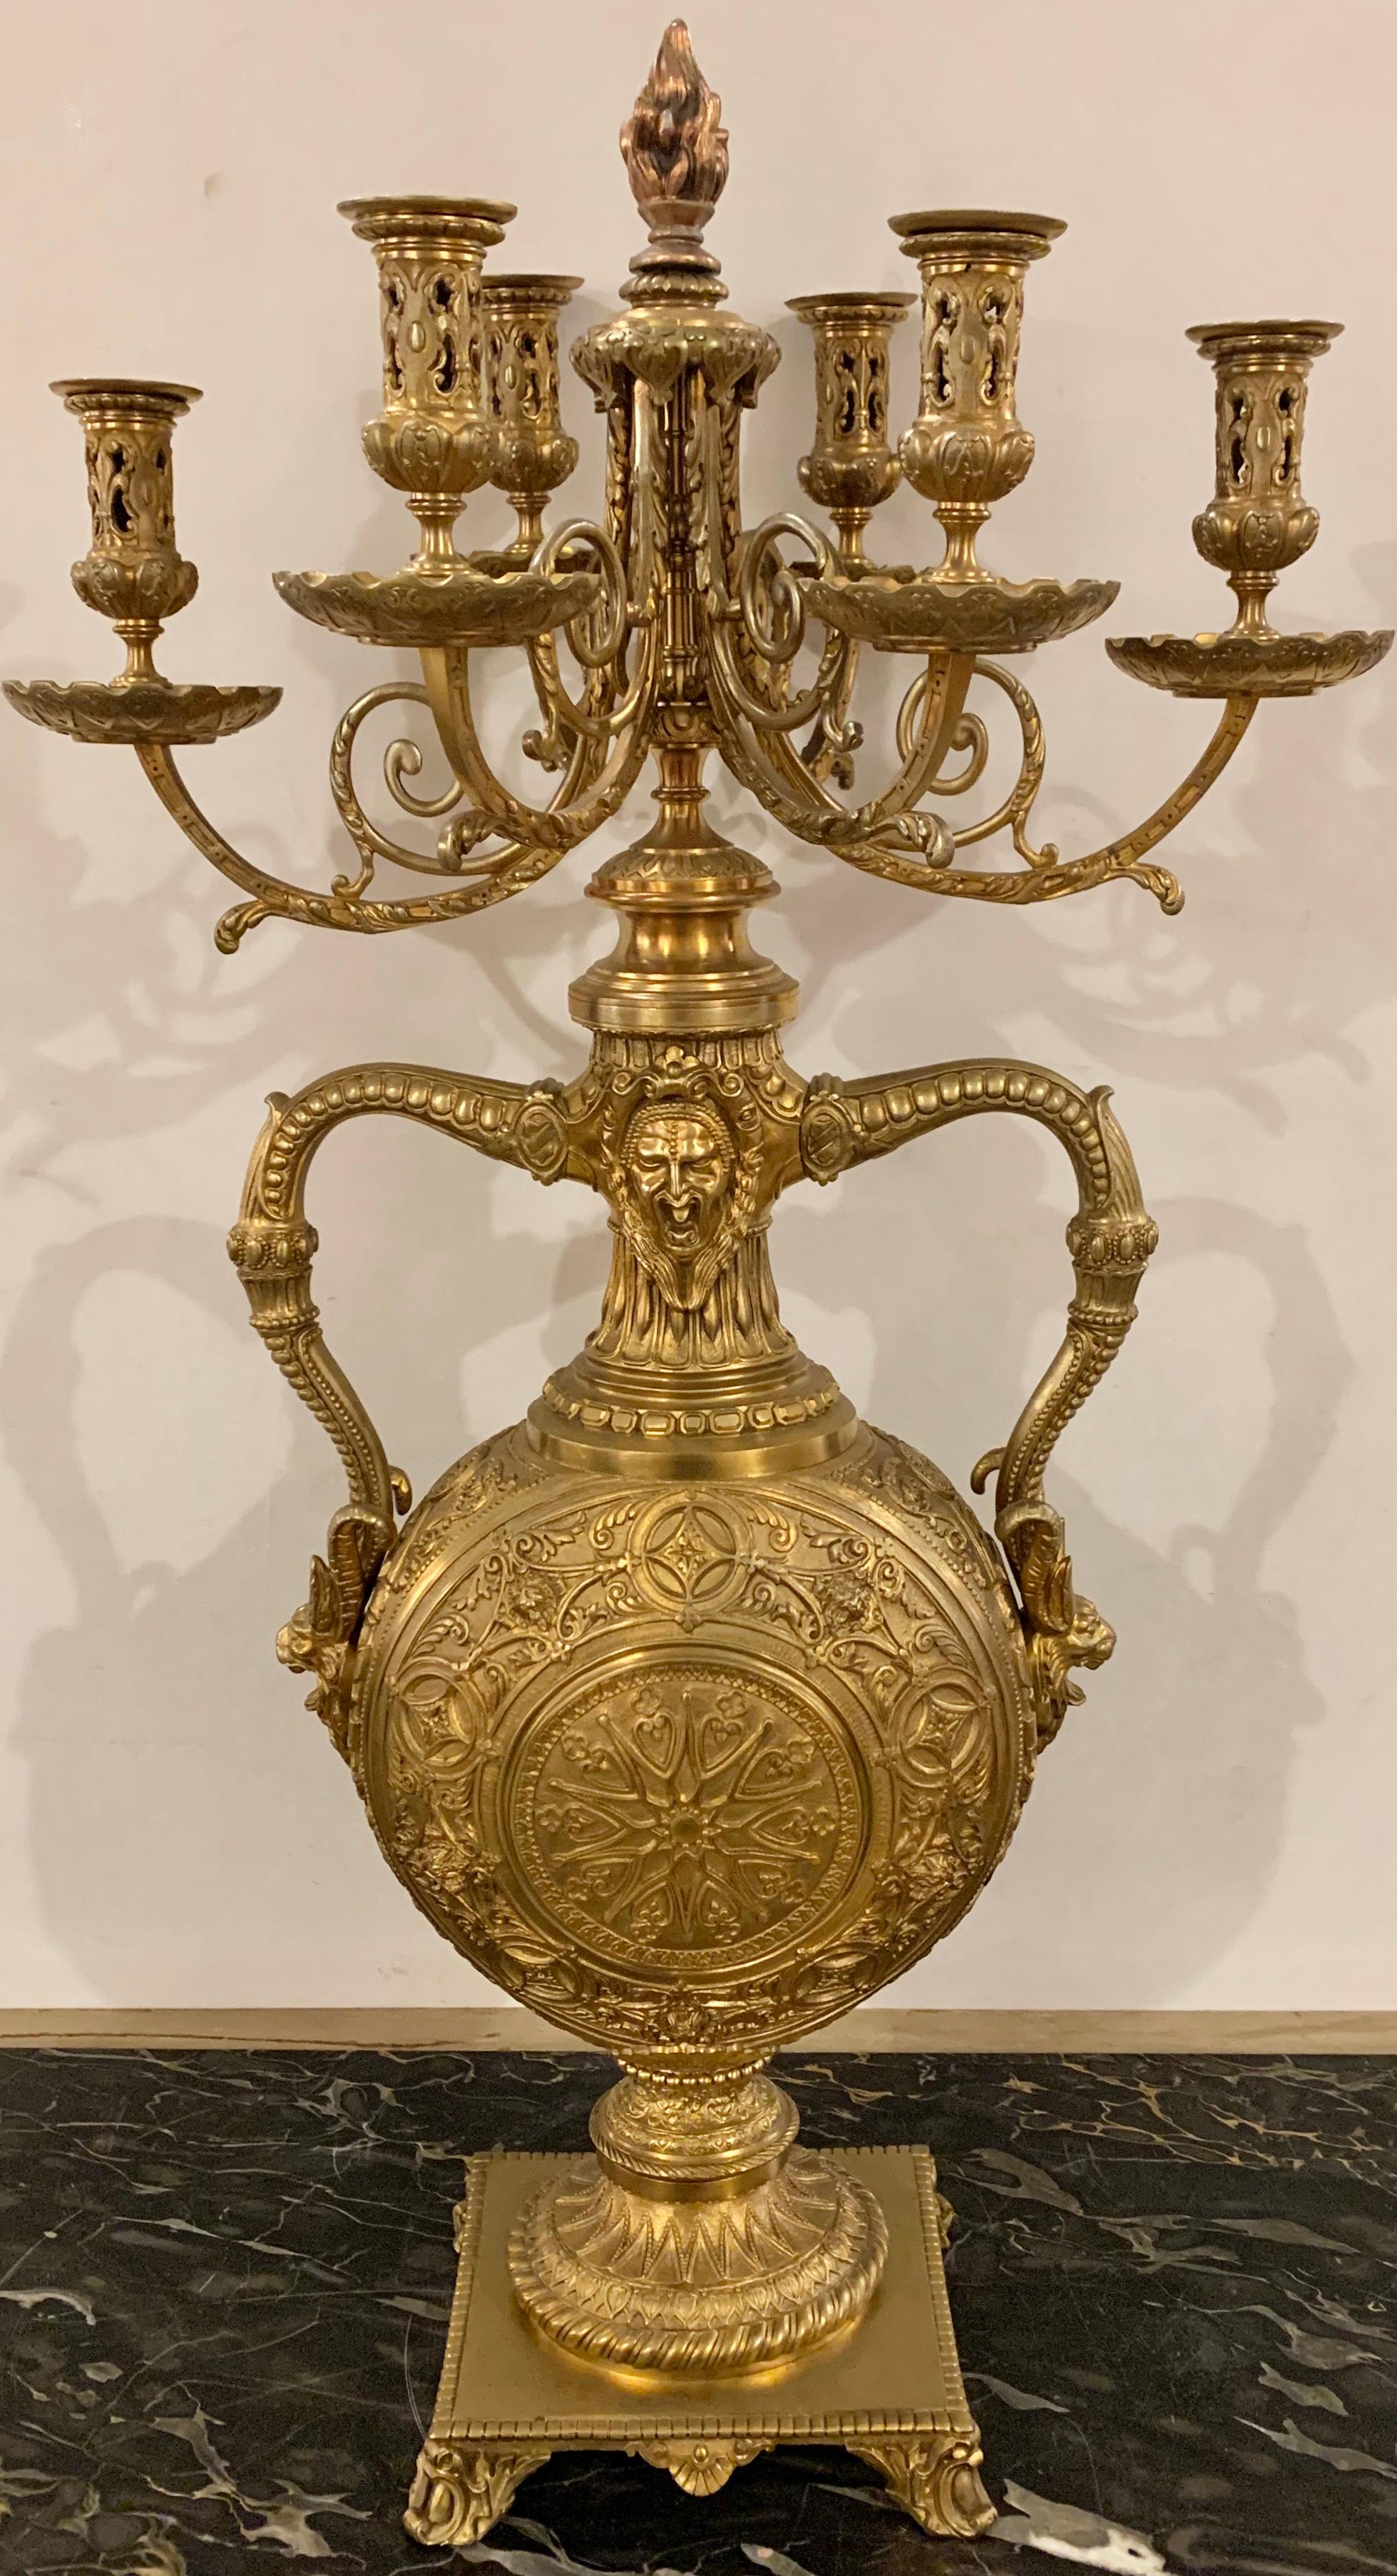 19th century bronze candelabras Barbedienne, French stamped. A pair of spectacular monumental urn form antique candelabras each bearing horned animals and busts.

Greg.